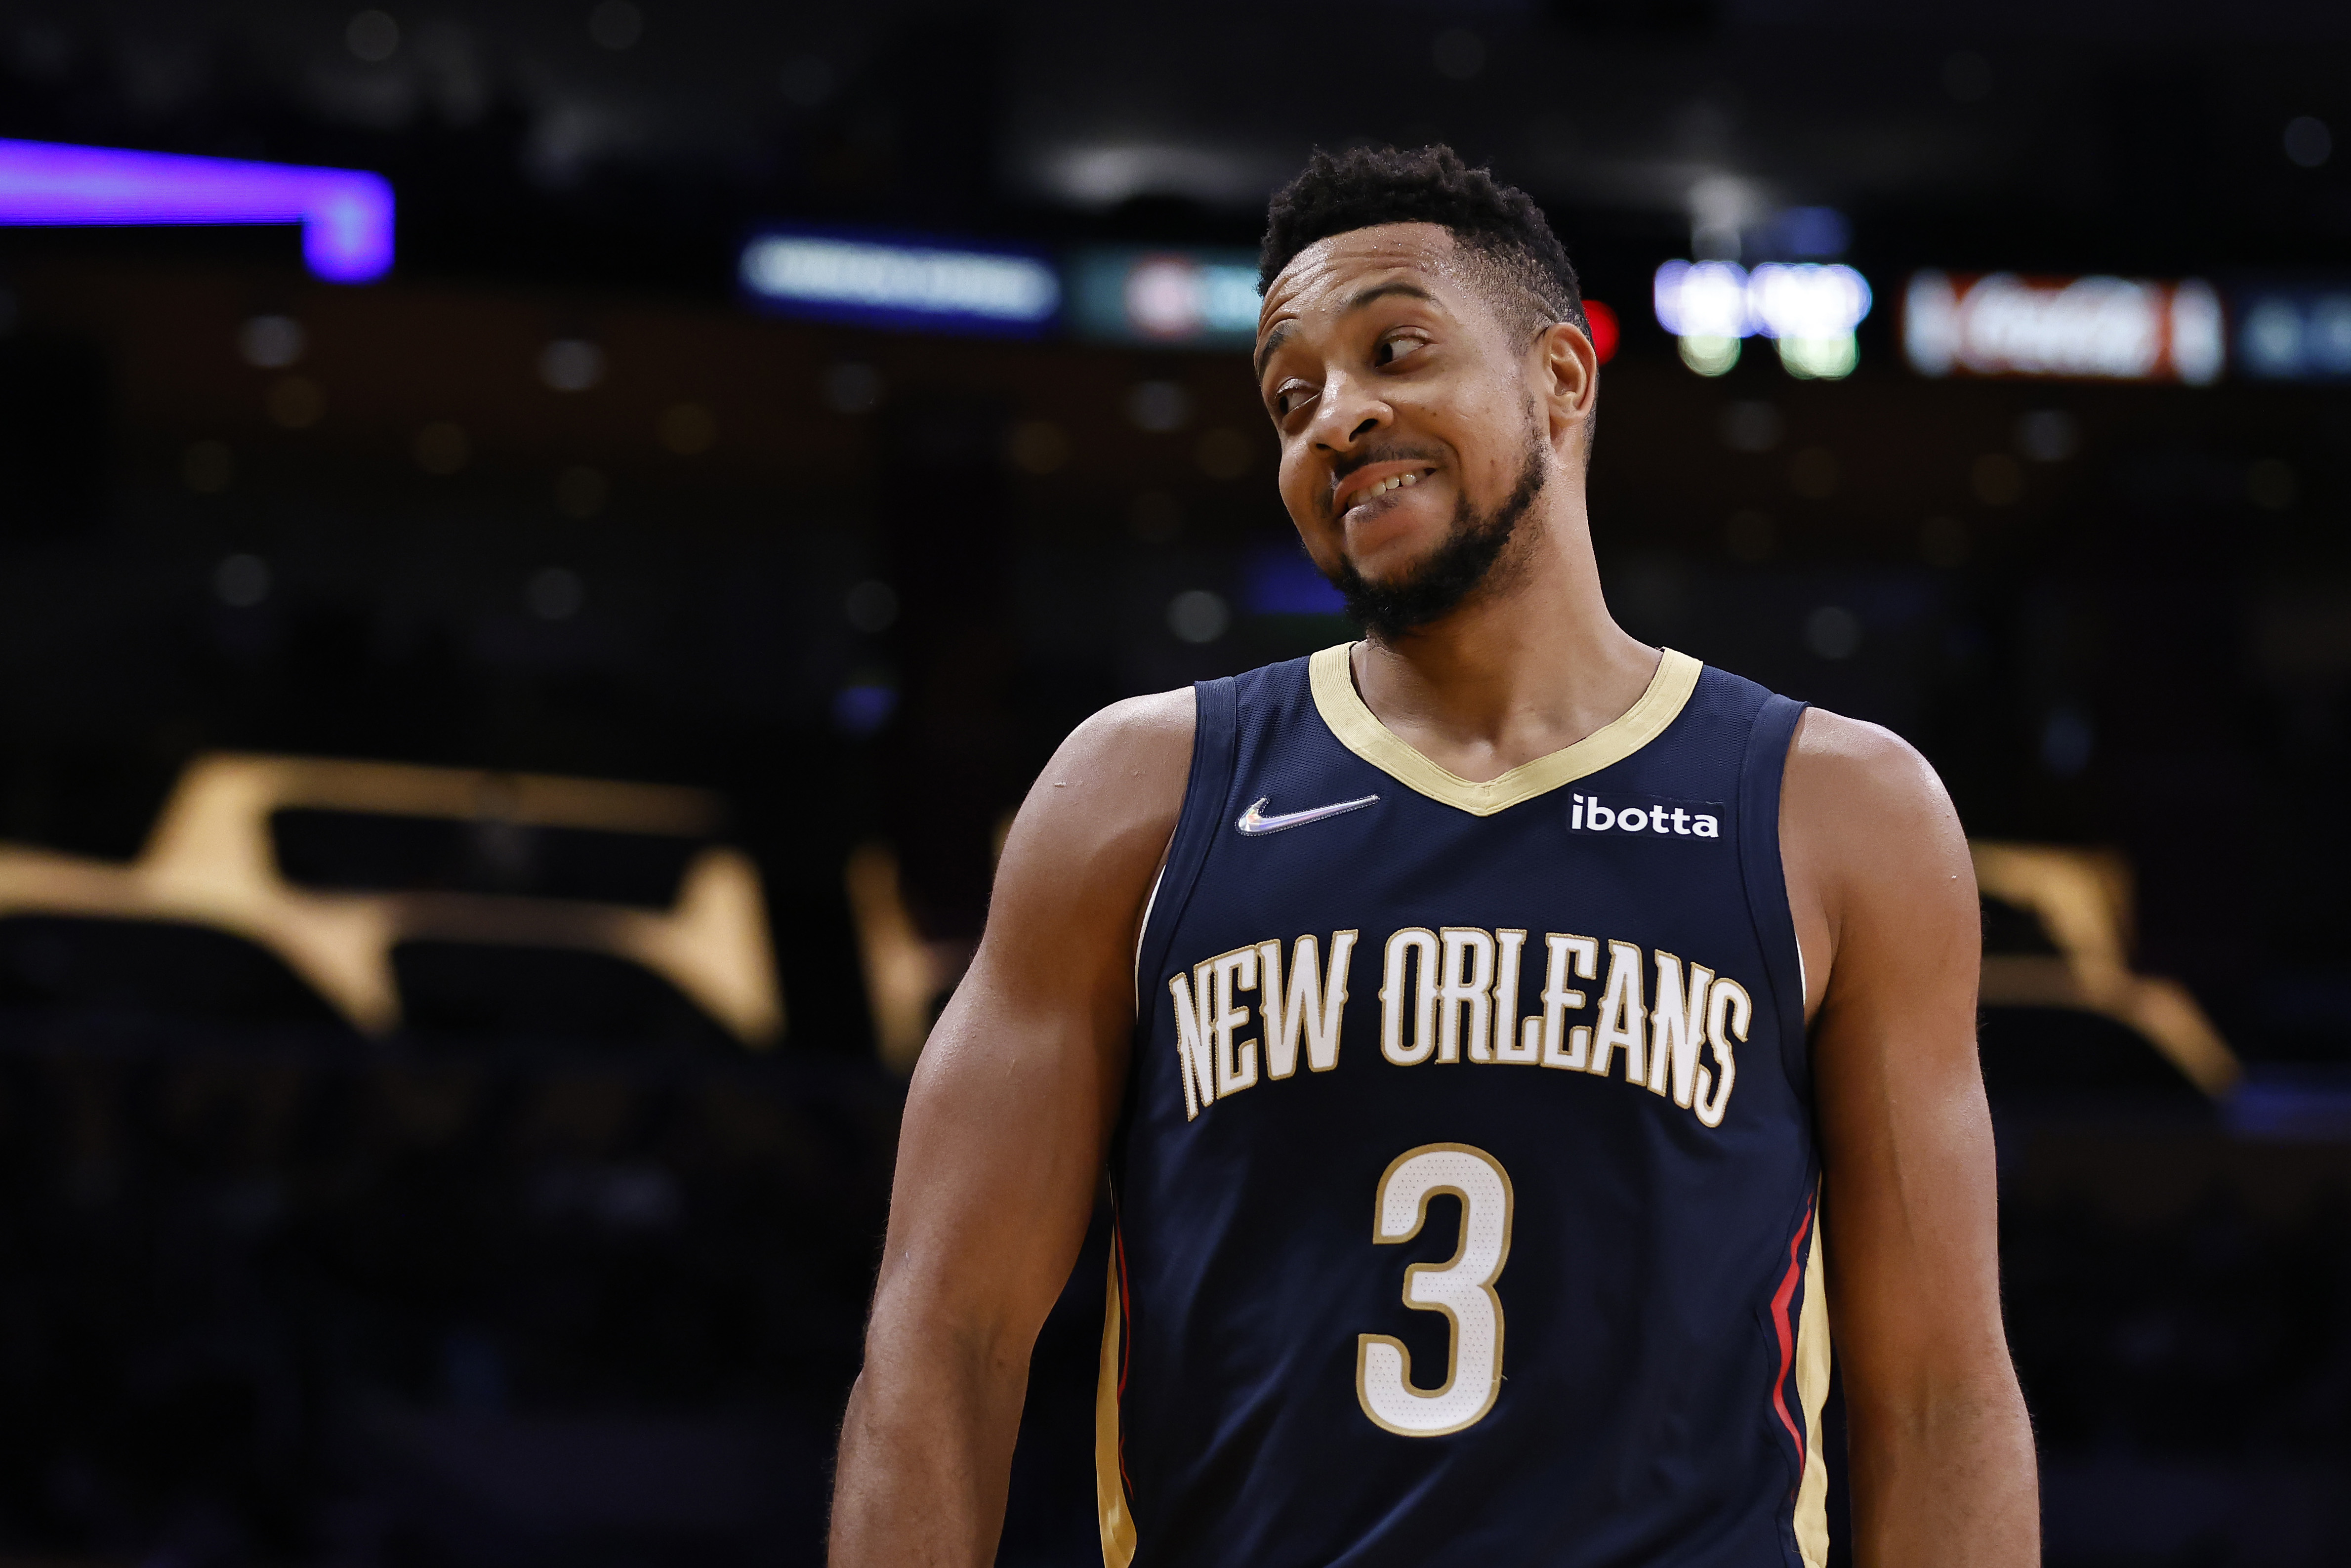 New Orleans Pelicans guard CJ McCollum reacts during an NBA game against the Los Angeles Lakers in February 2022